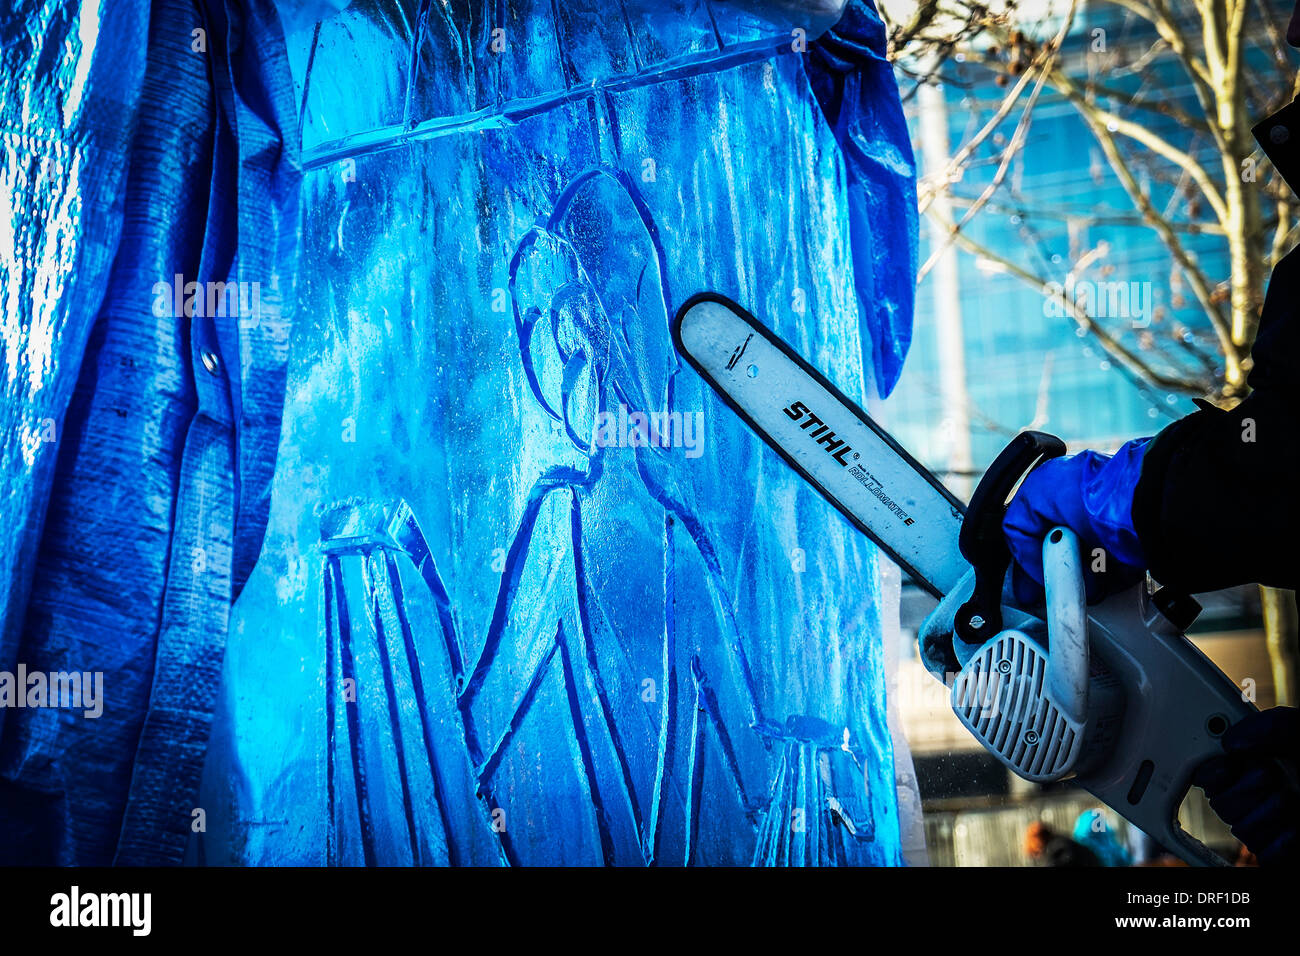 Artists working to create their sculpture as part of the 2014 London Ice Sculpting Festival. Stock Photo